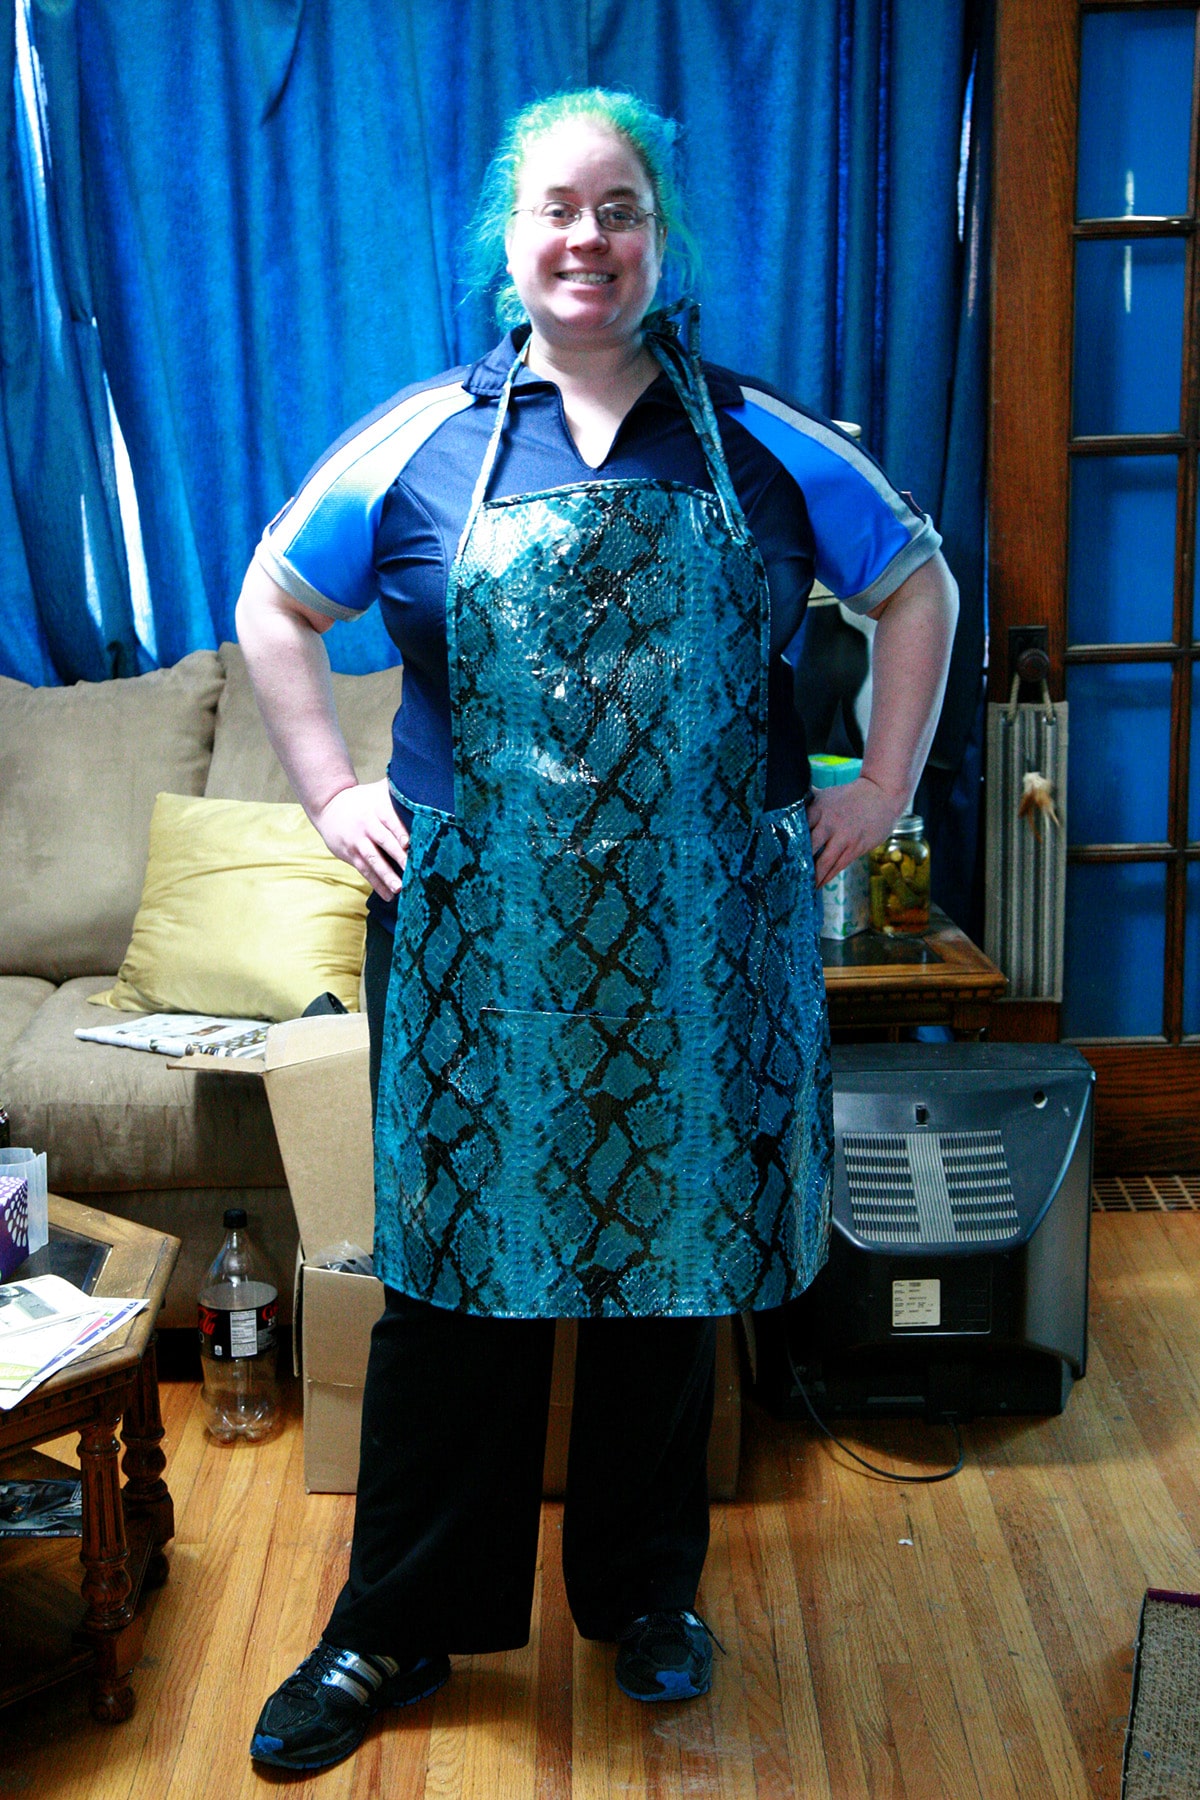 A blue haired woman wearing a blue snakeskin print apron.